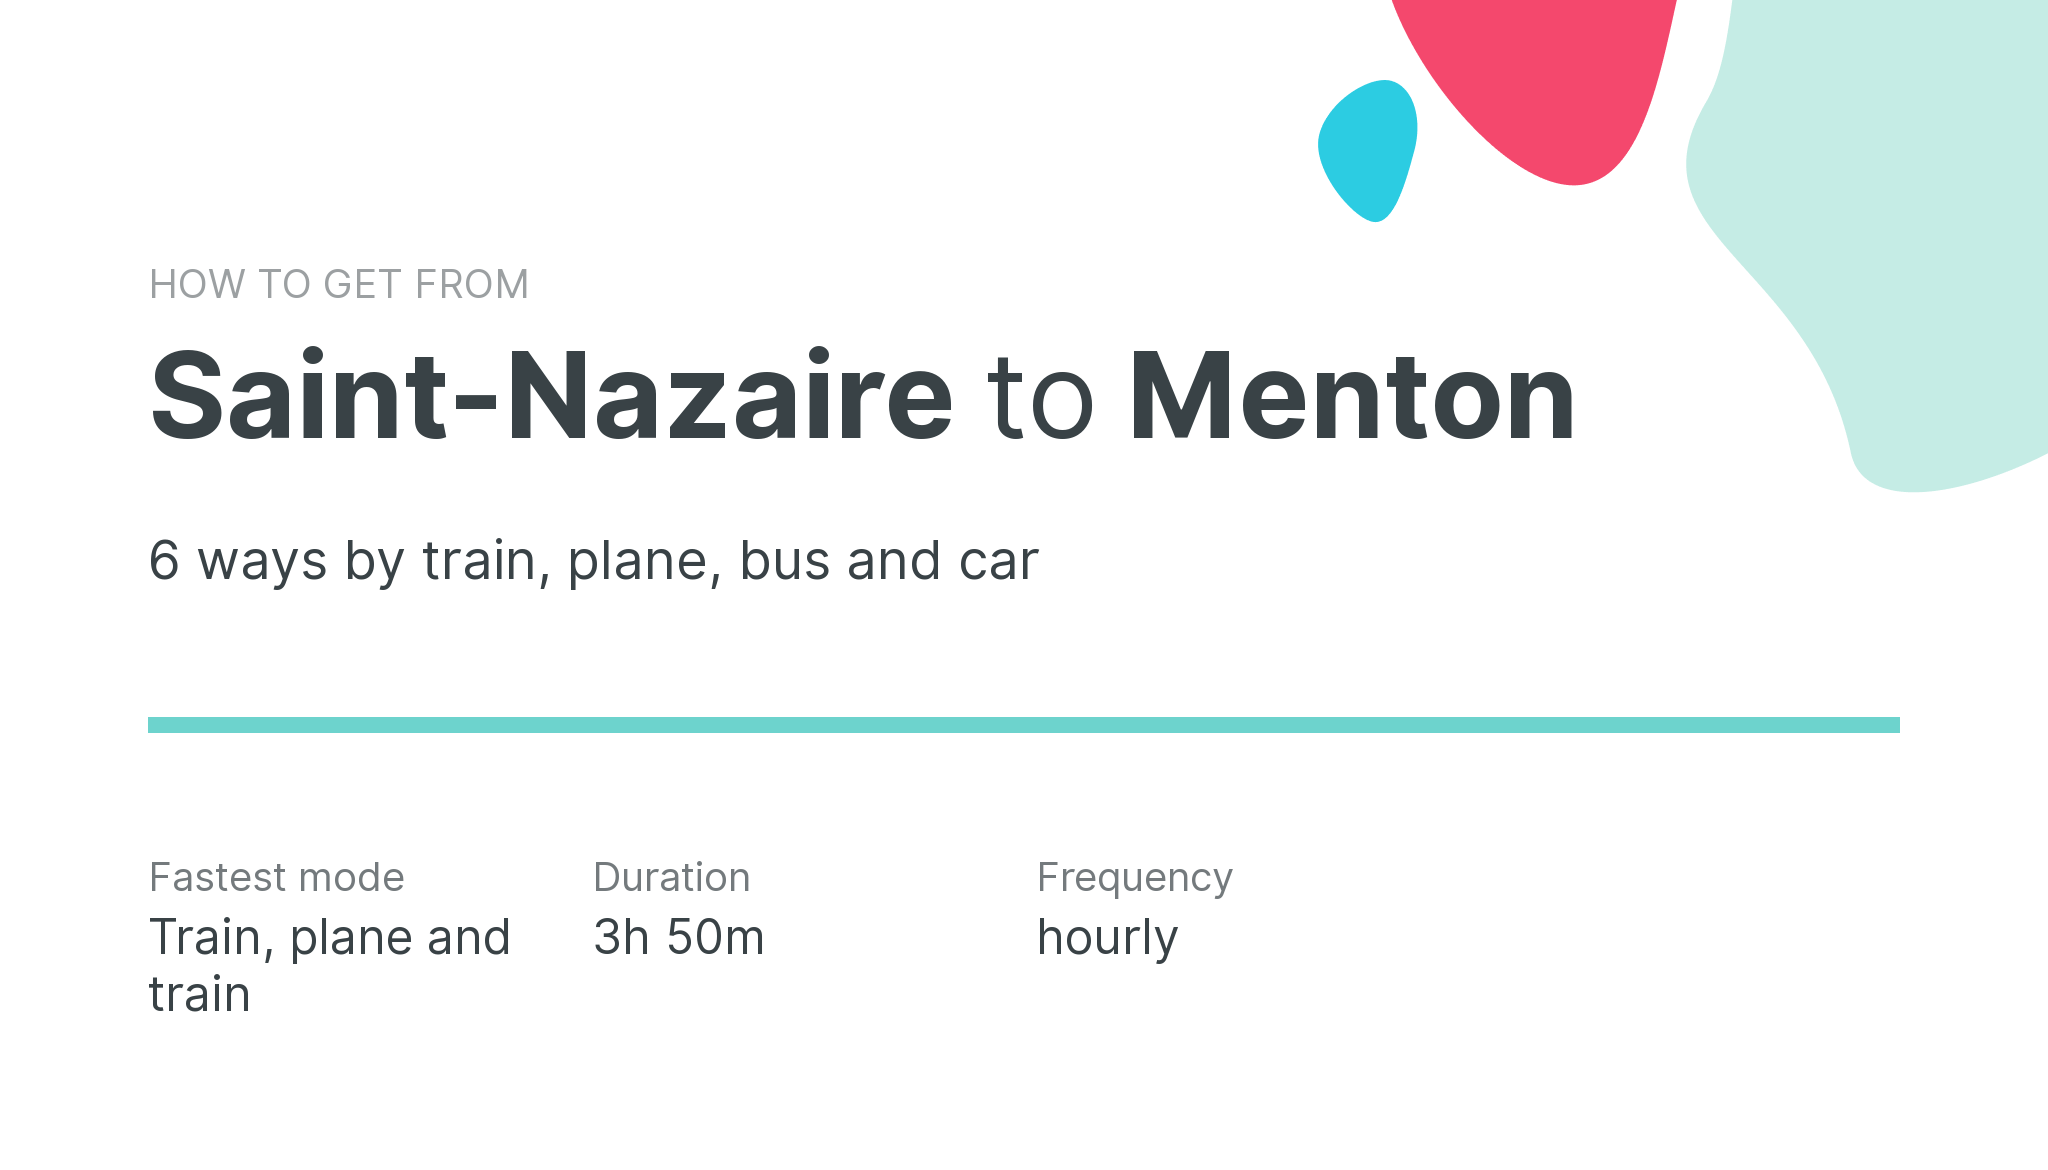 How do I get from Saint-Nazaire to Menton